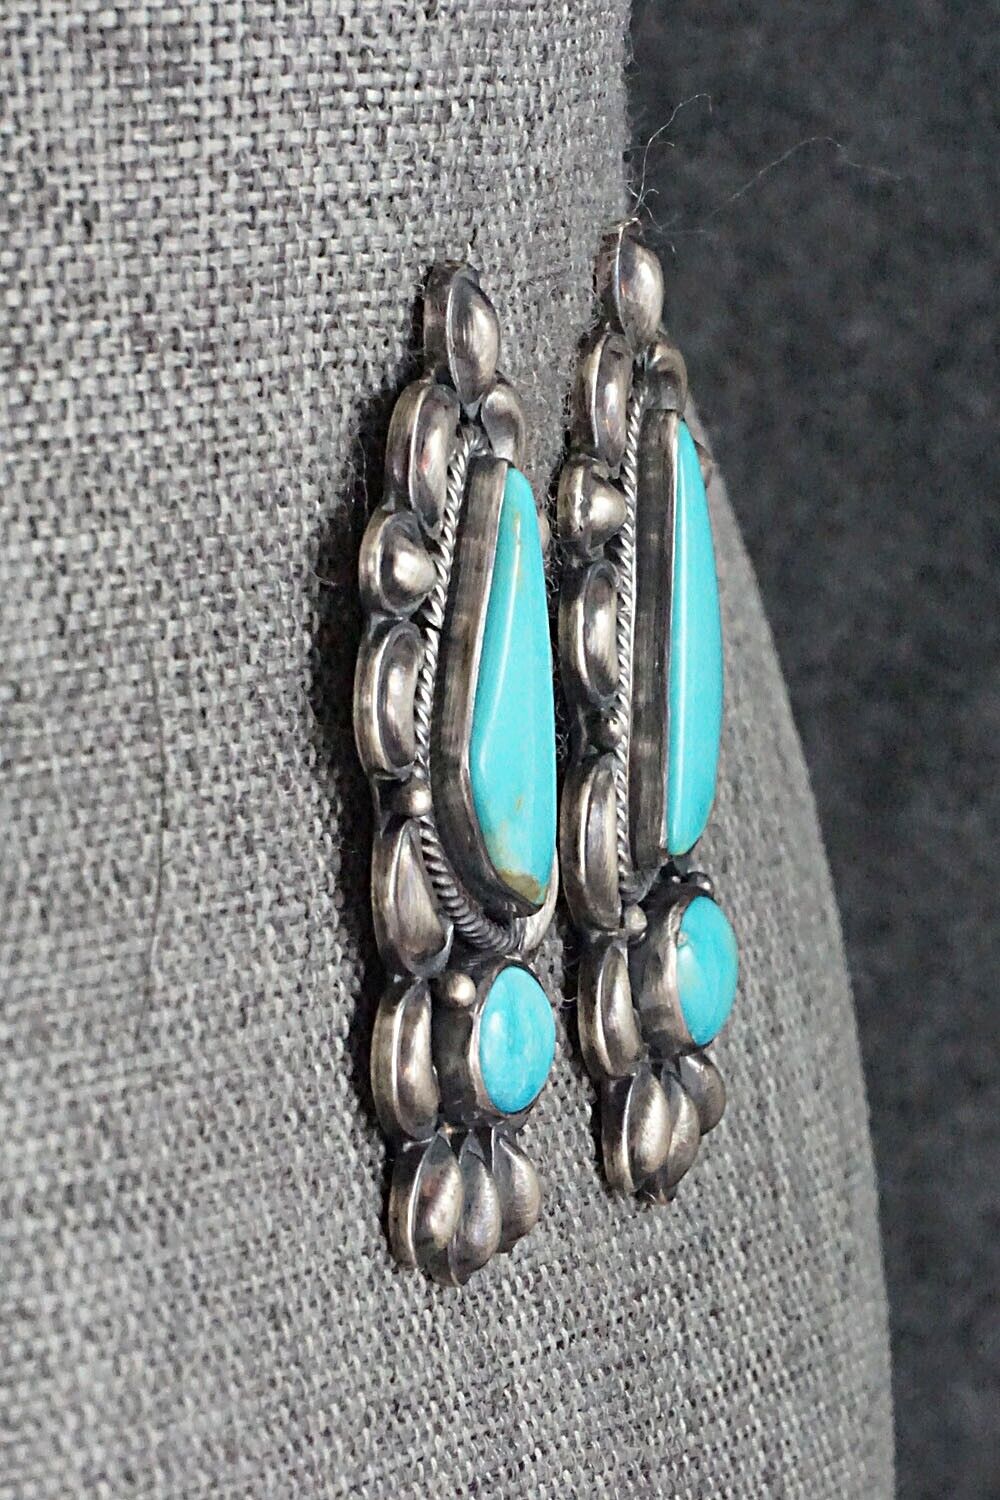 Turquoise & Sterling Silver Earrings - Bernyse Chavez